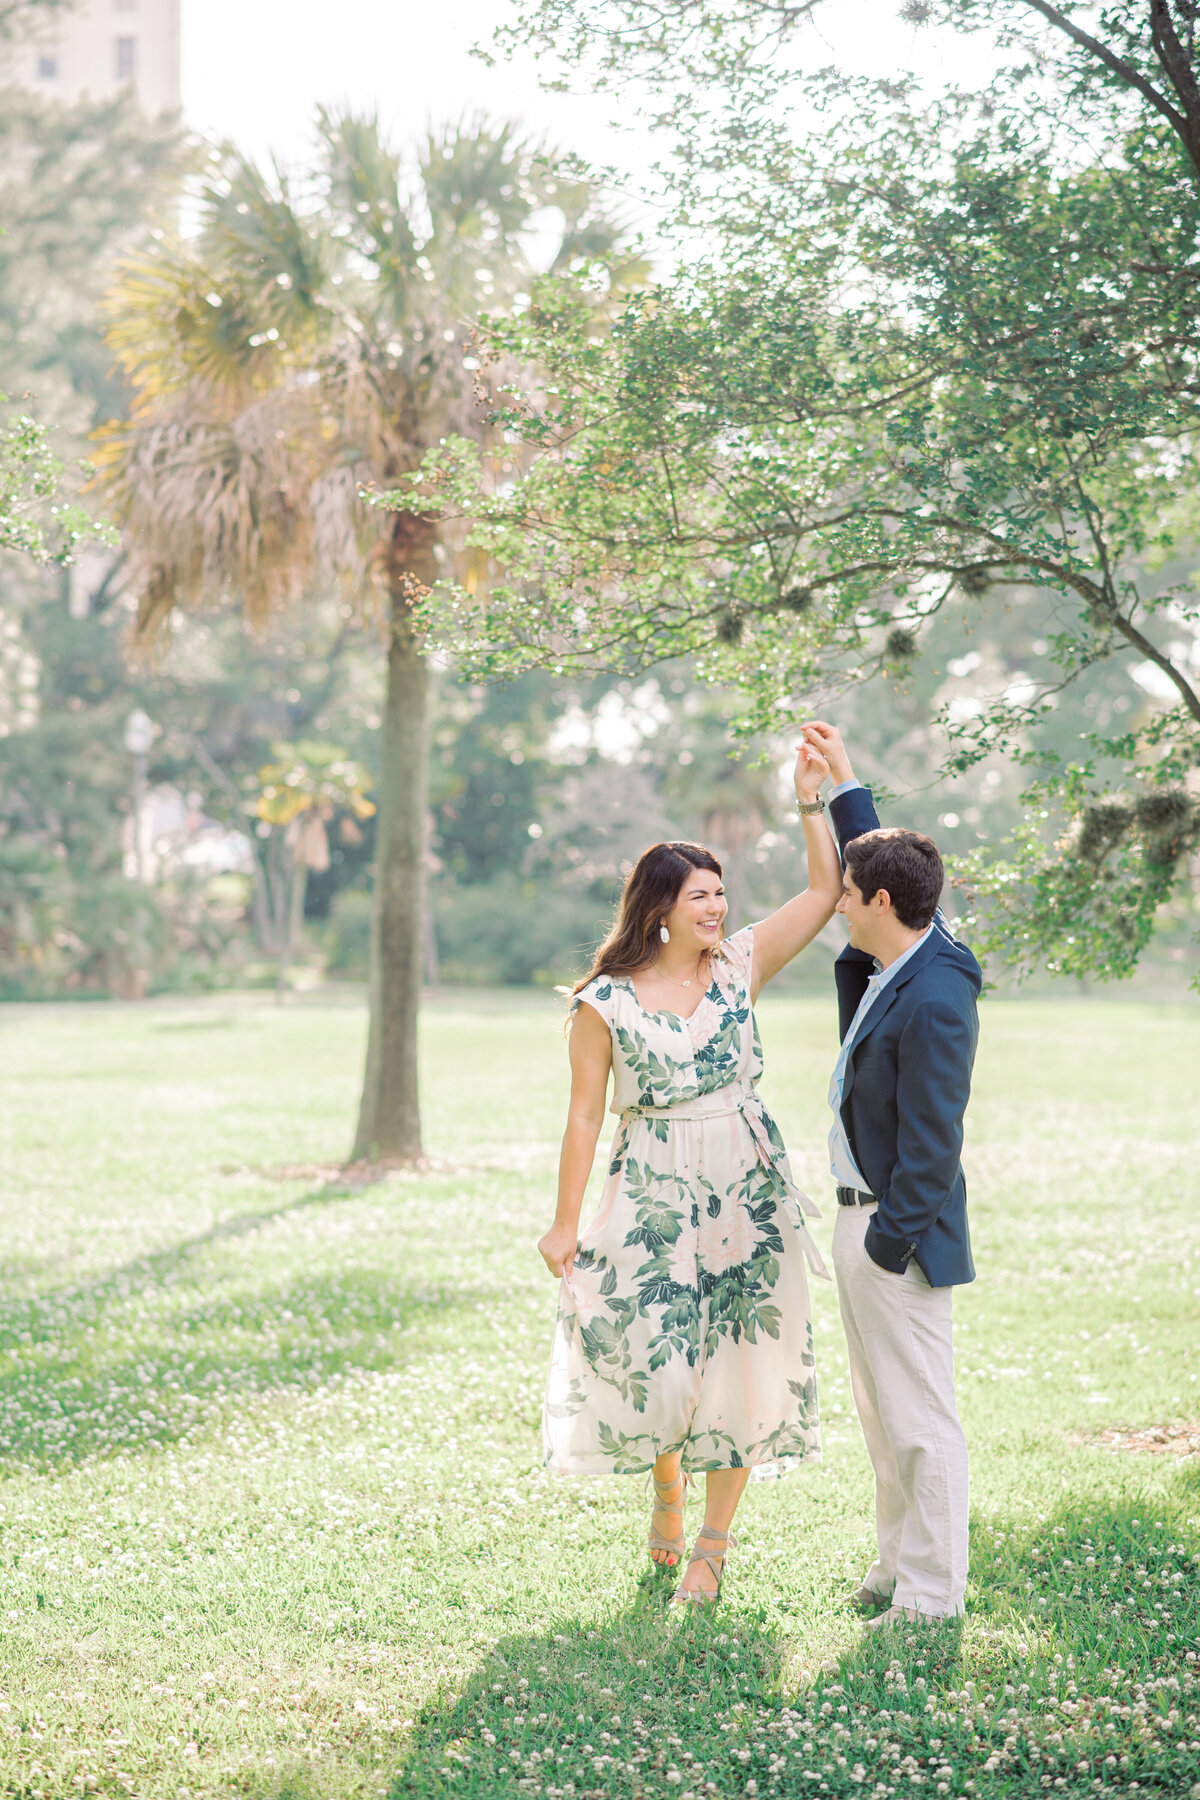 Arsenal Park Engagements in Baton Rouge-32